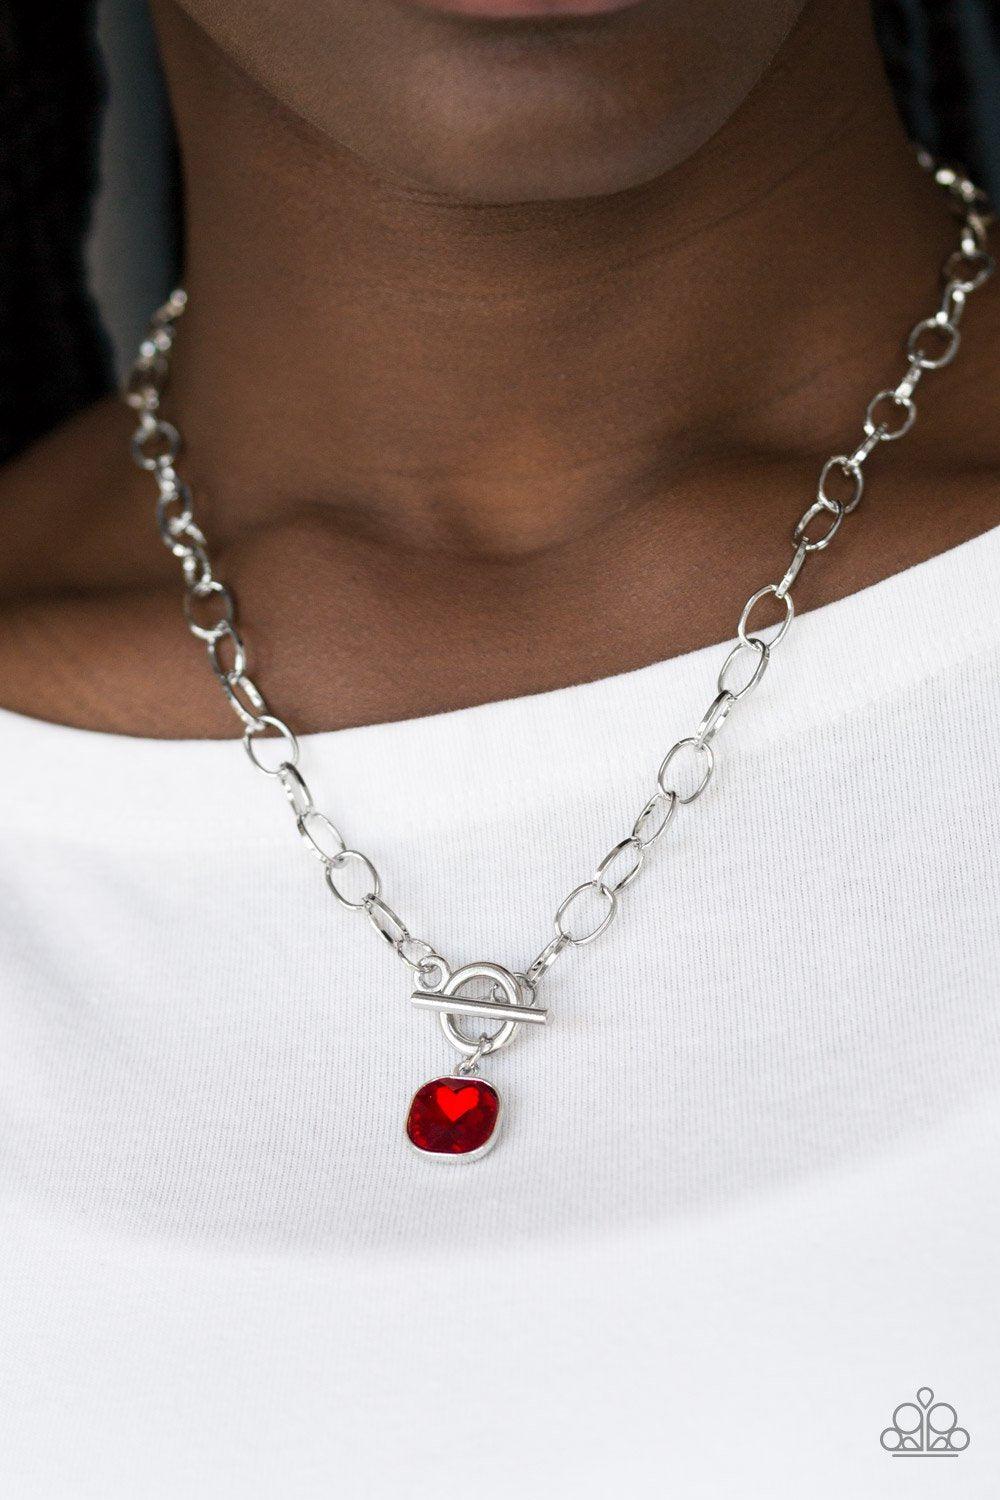 Dynamite Dazzle Red Necklace - Paparazzi Accessories-CarasShop.com - $5 Jewelry by Cara Jewels